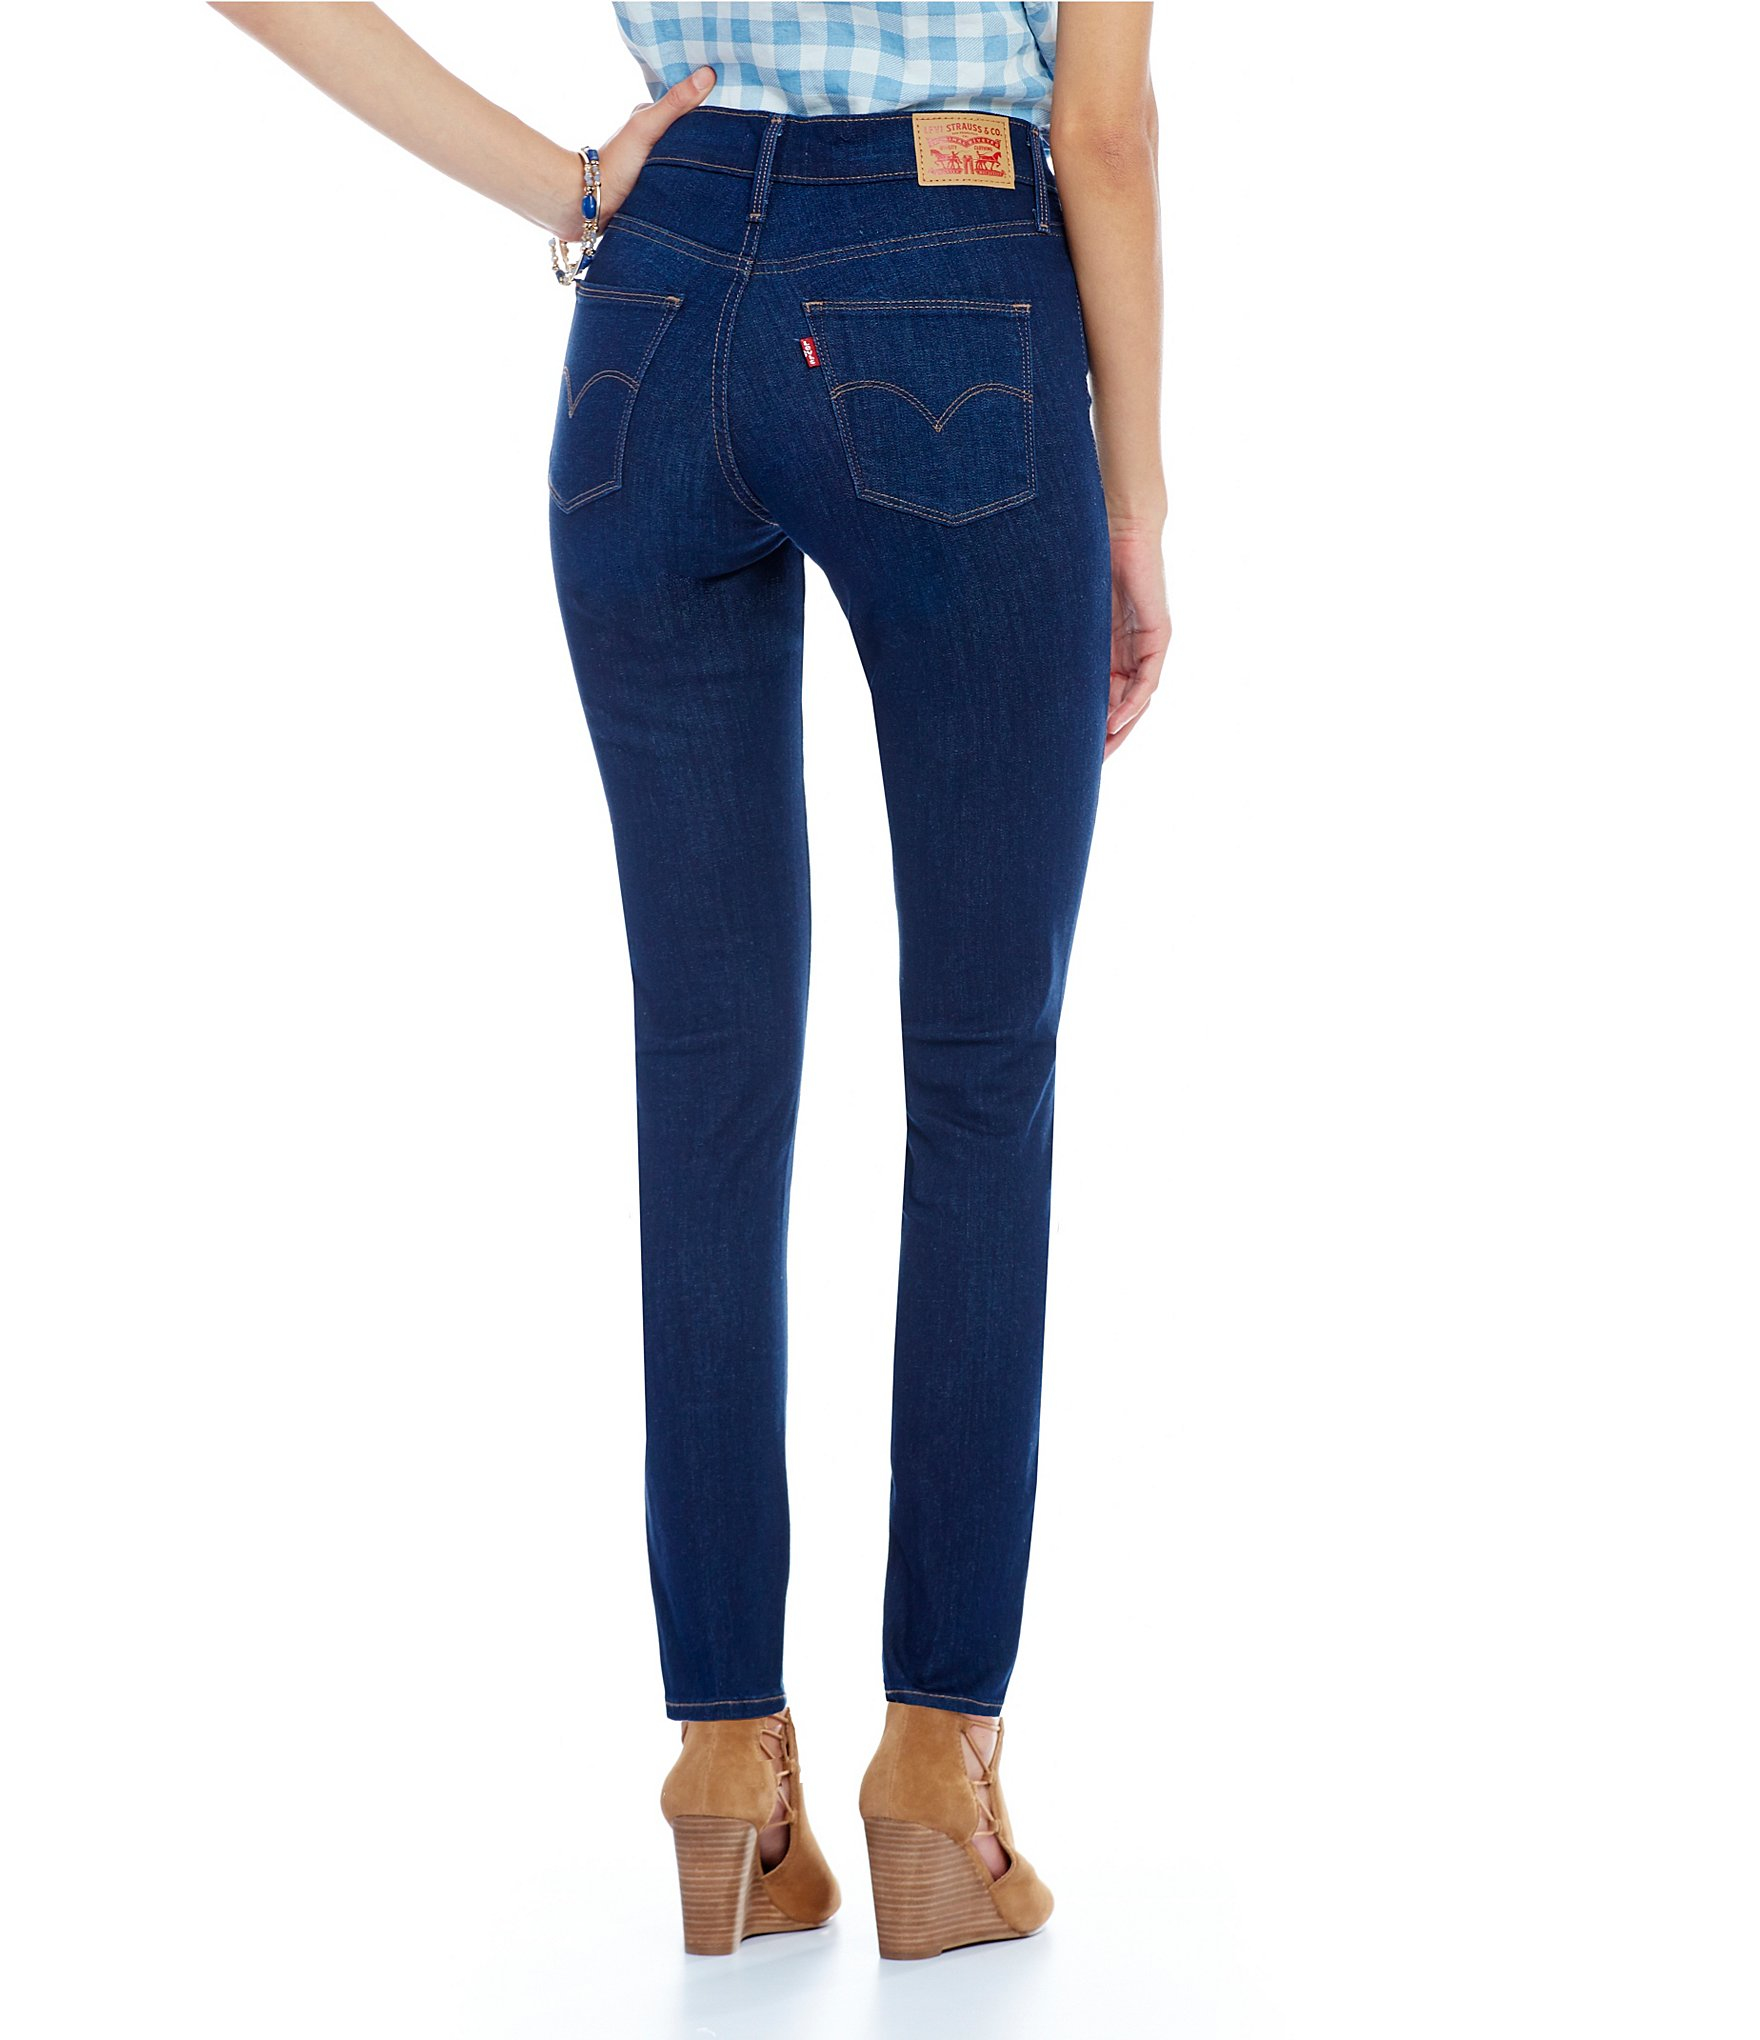 Lyst - Levi's Levi ́s® Slimming Skinny Jeans in Blue